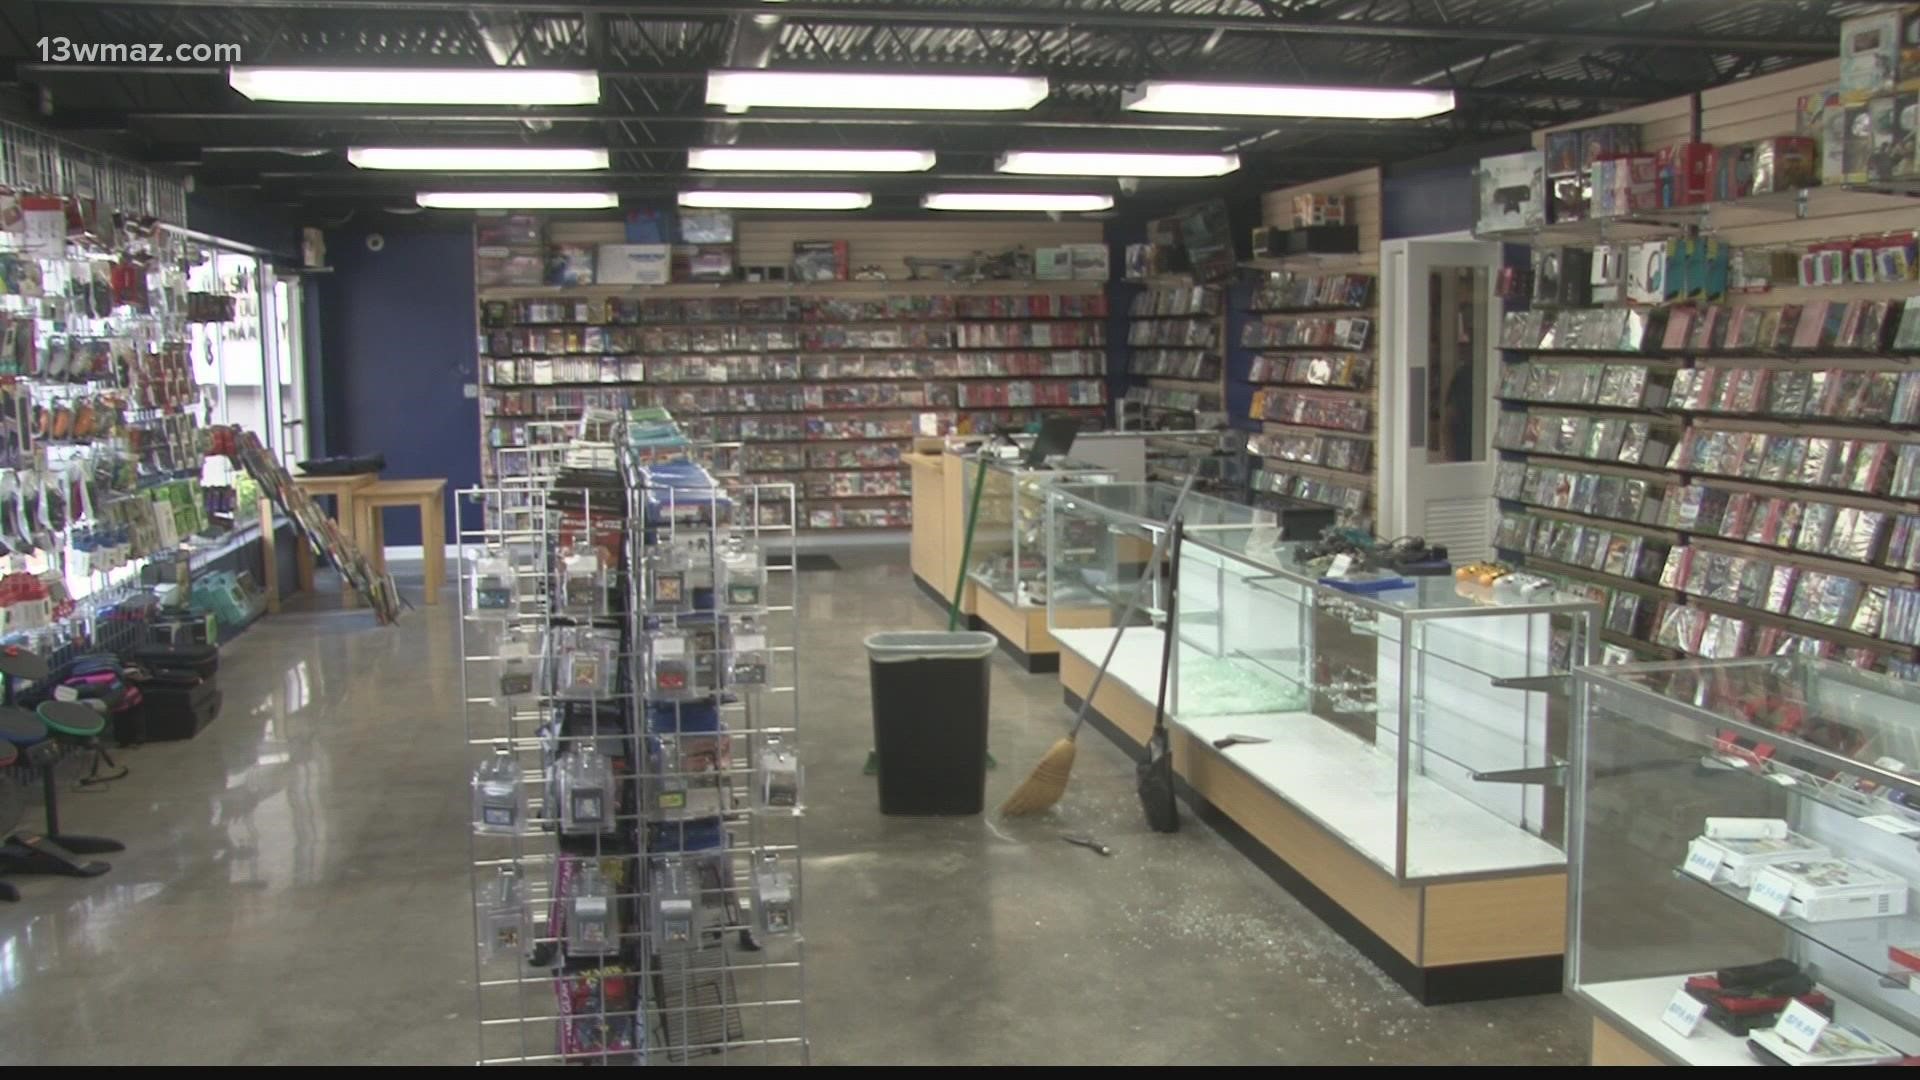 Store owner Aaron Gray told 13WMAZ that surveillance footage shows the burglars using a rock to smash in the door.